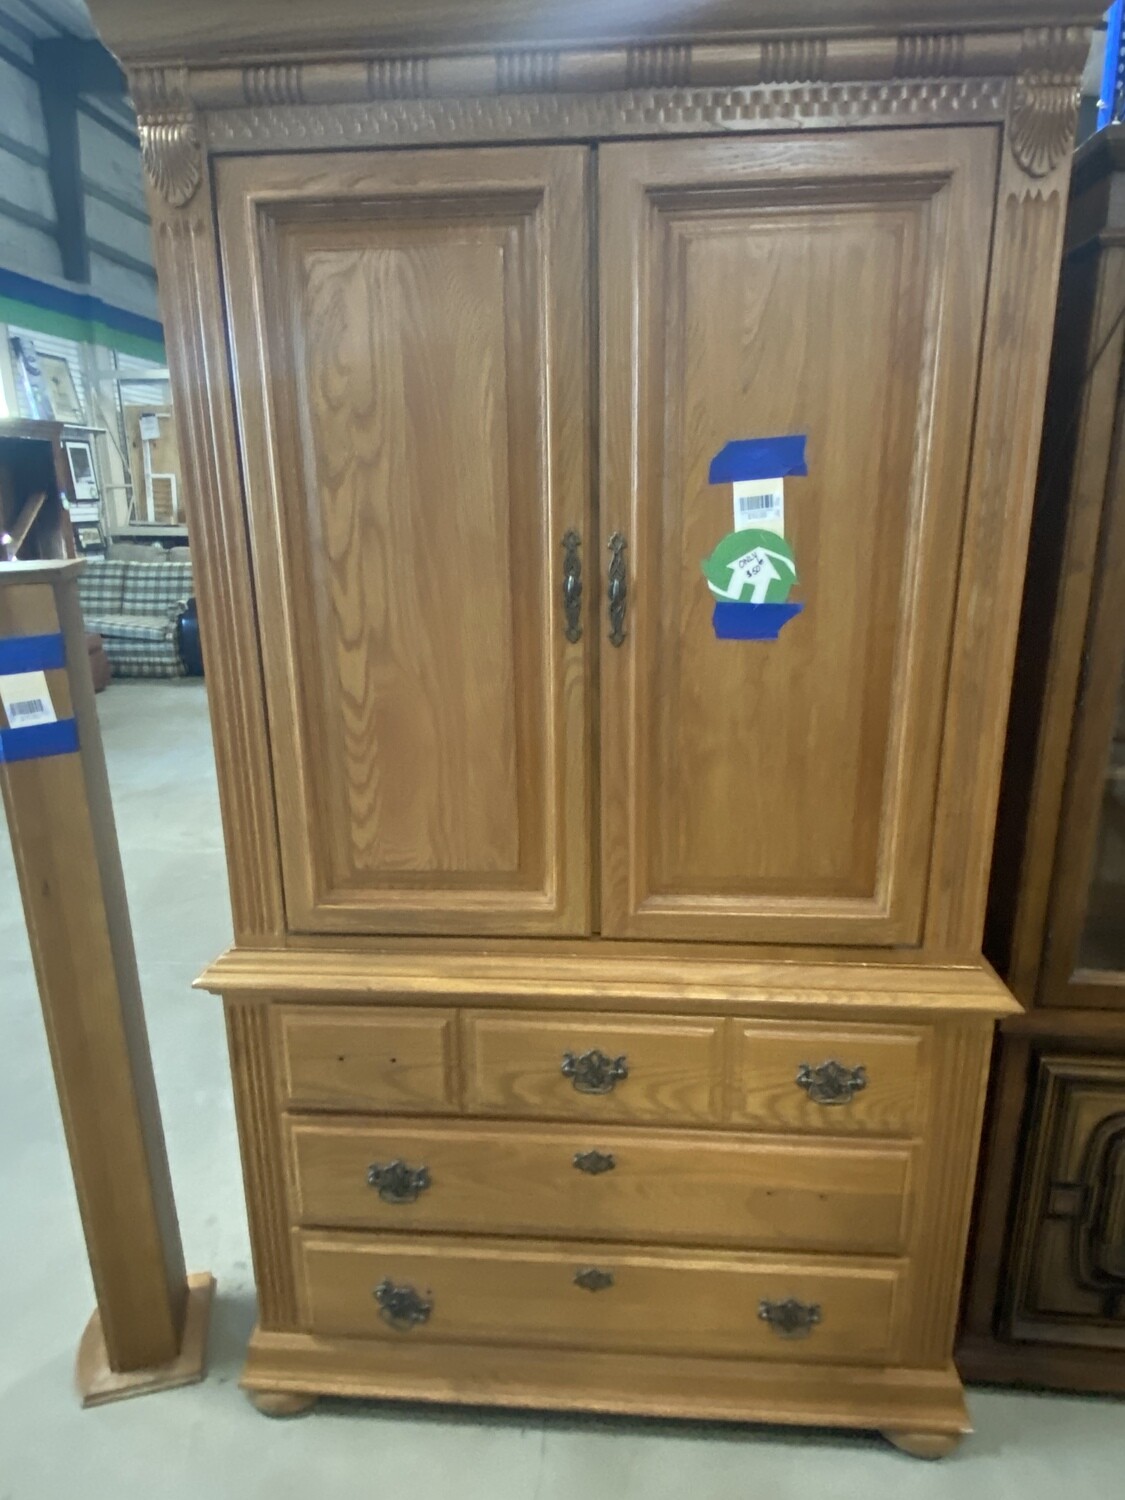 CLEARANCE LIGHT BROWN ARMOIRE